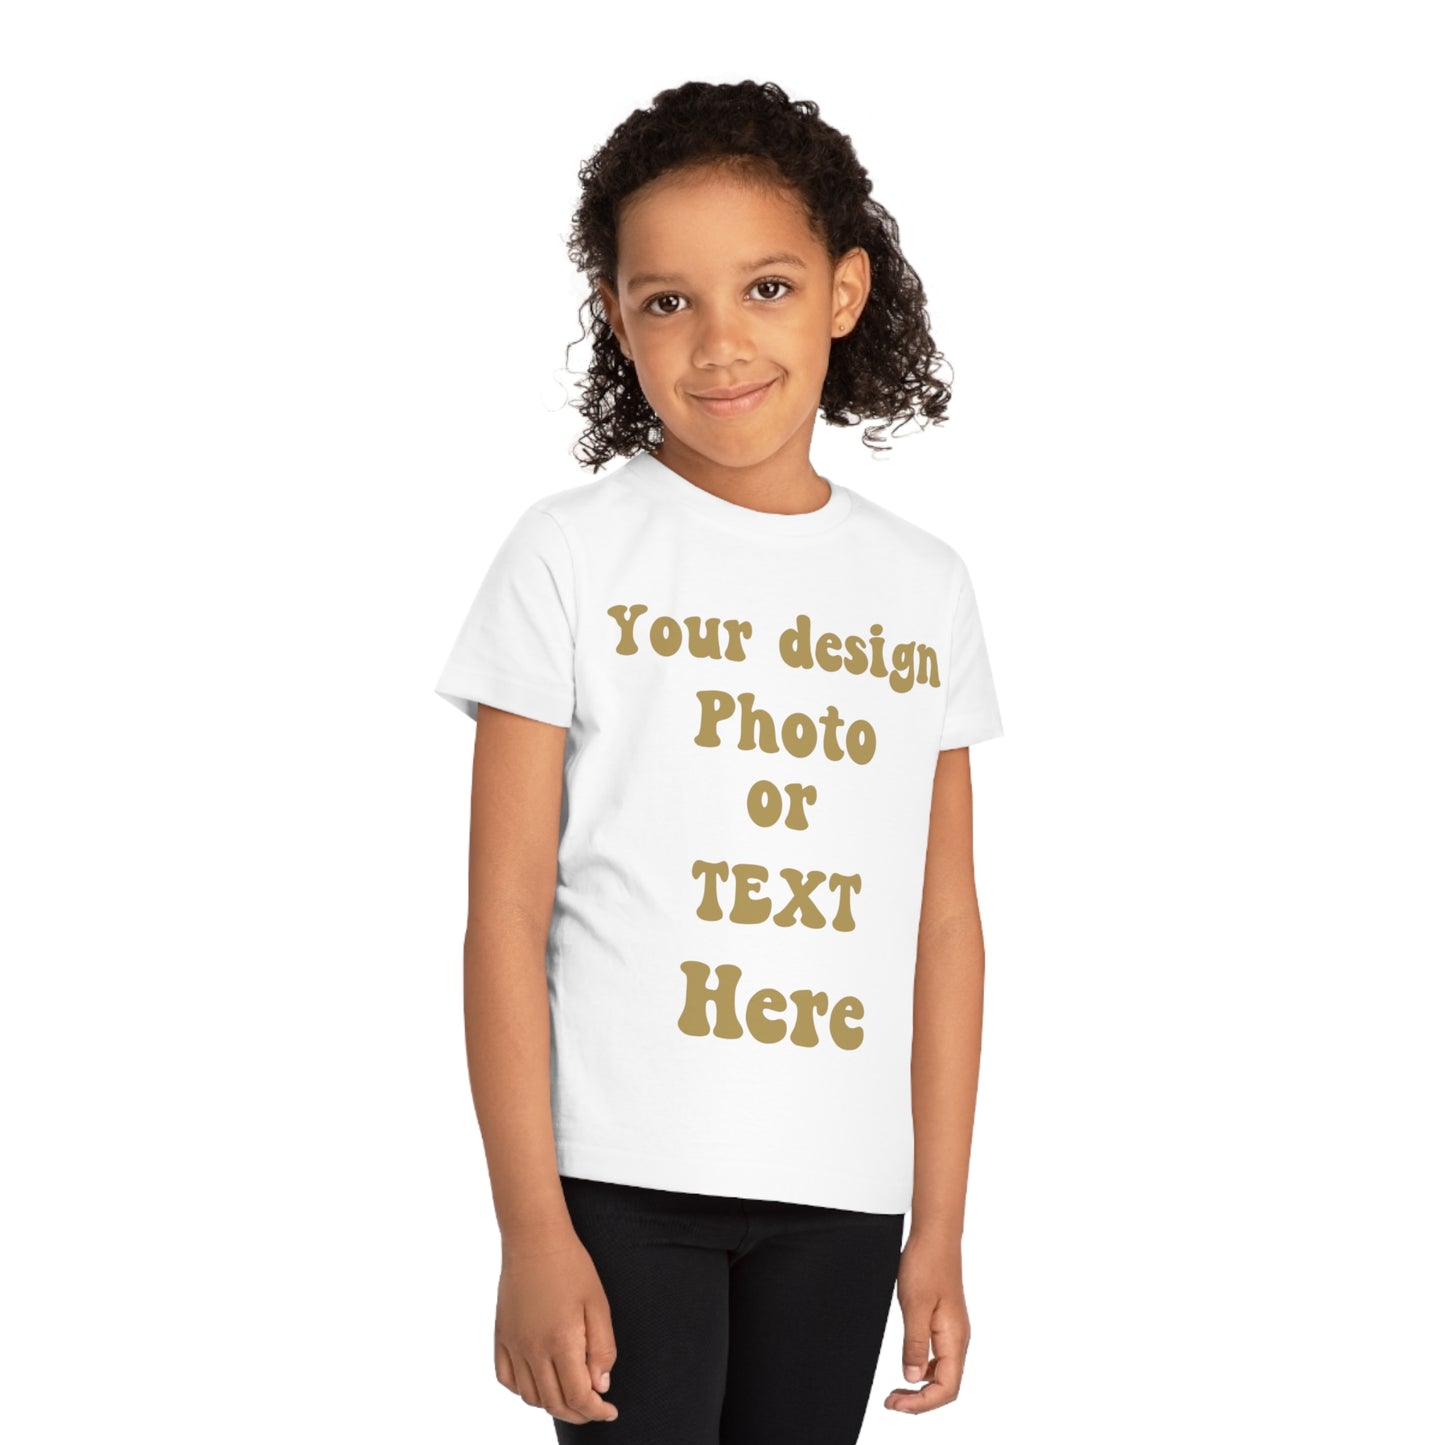 Kids' Personalized T-Shirt - Custom Children's Tee with Your Own Design Kids clothes   